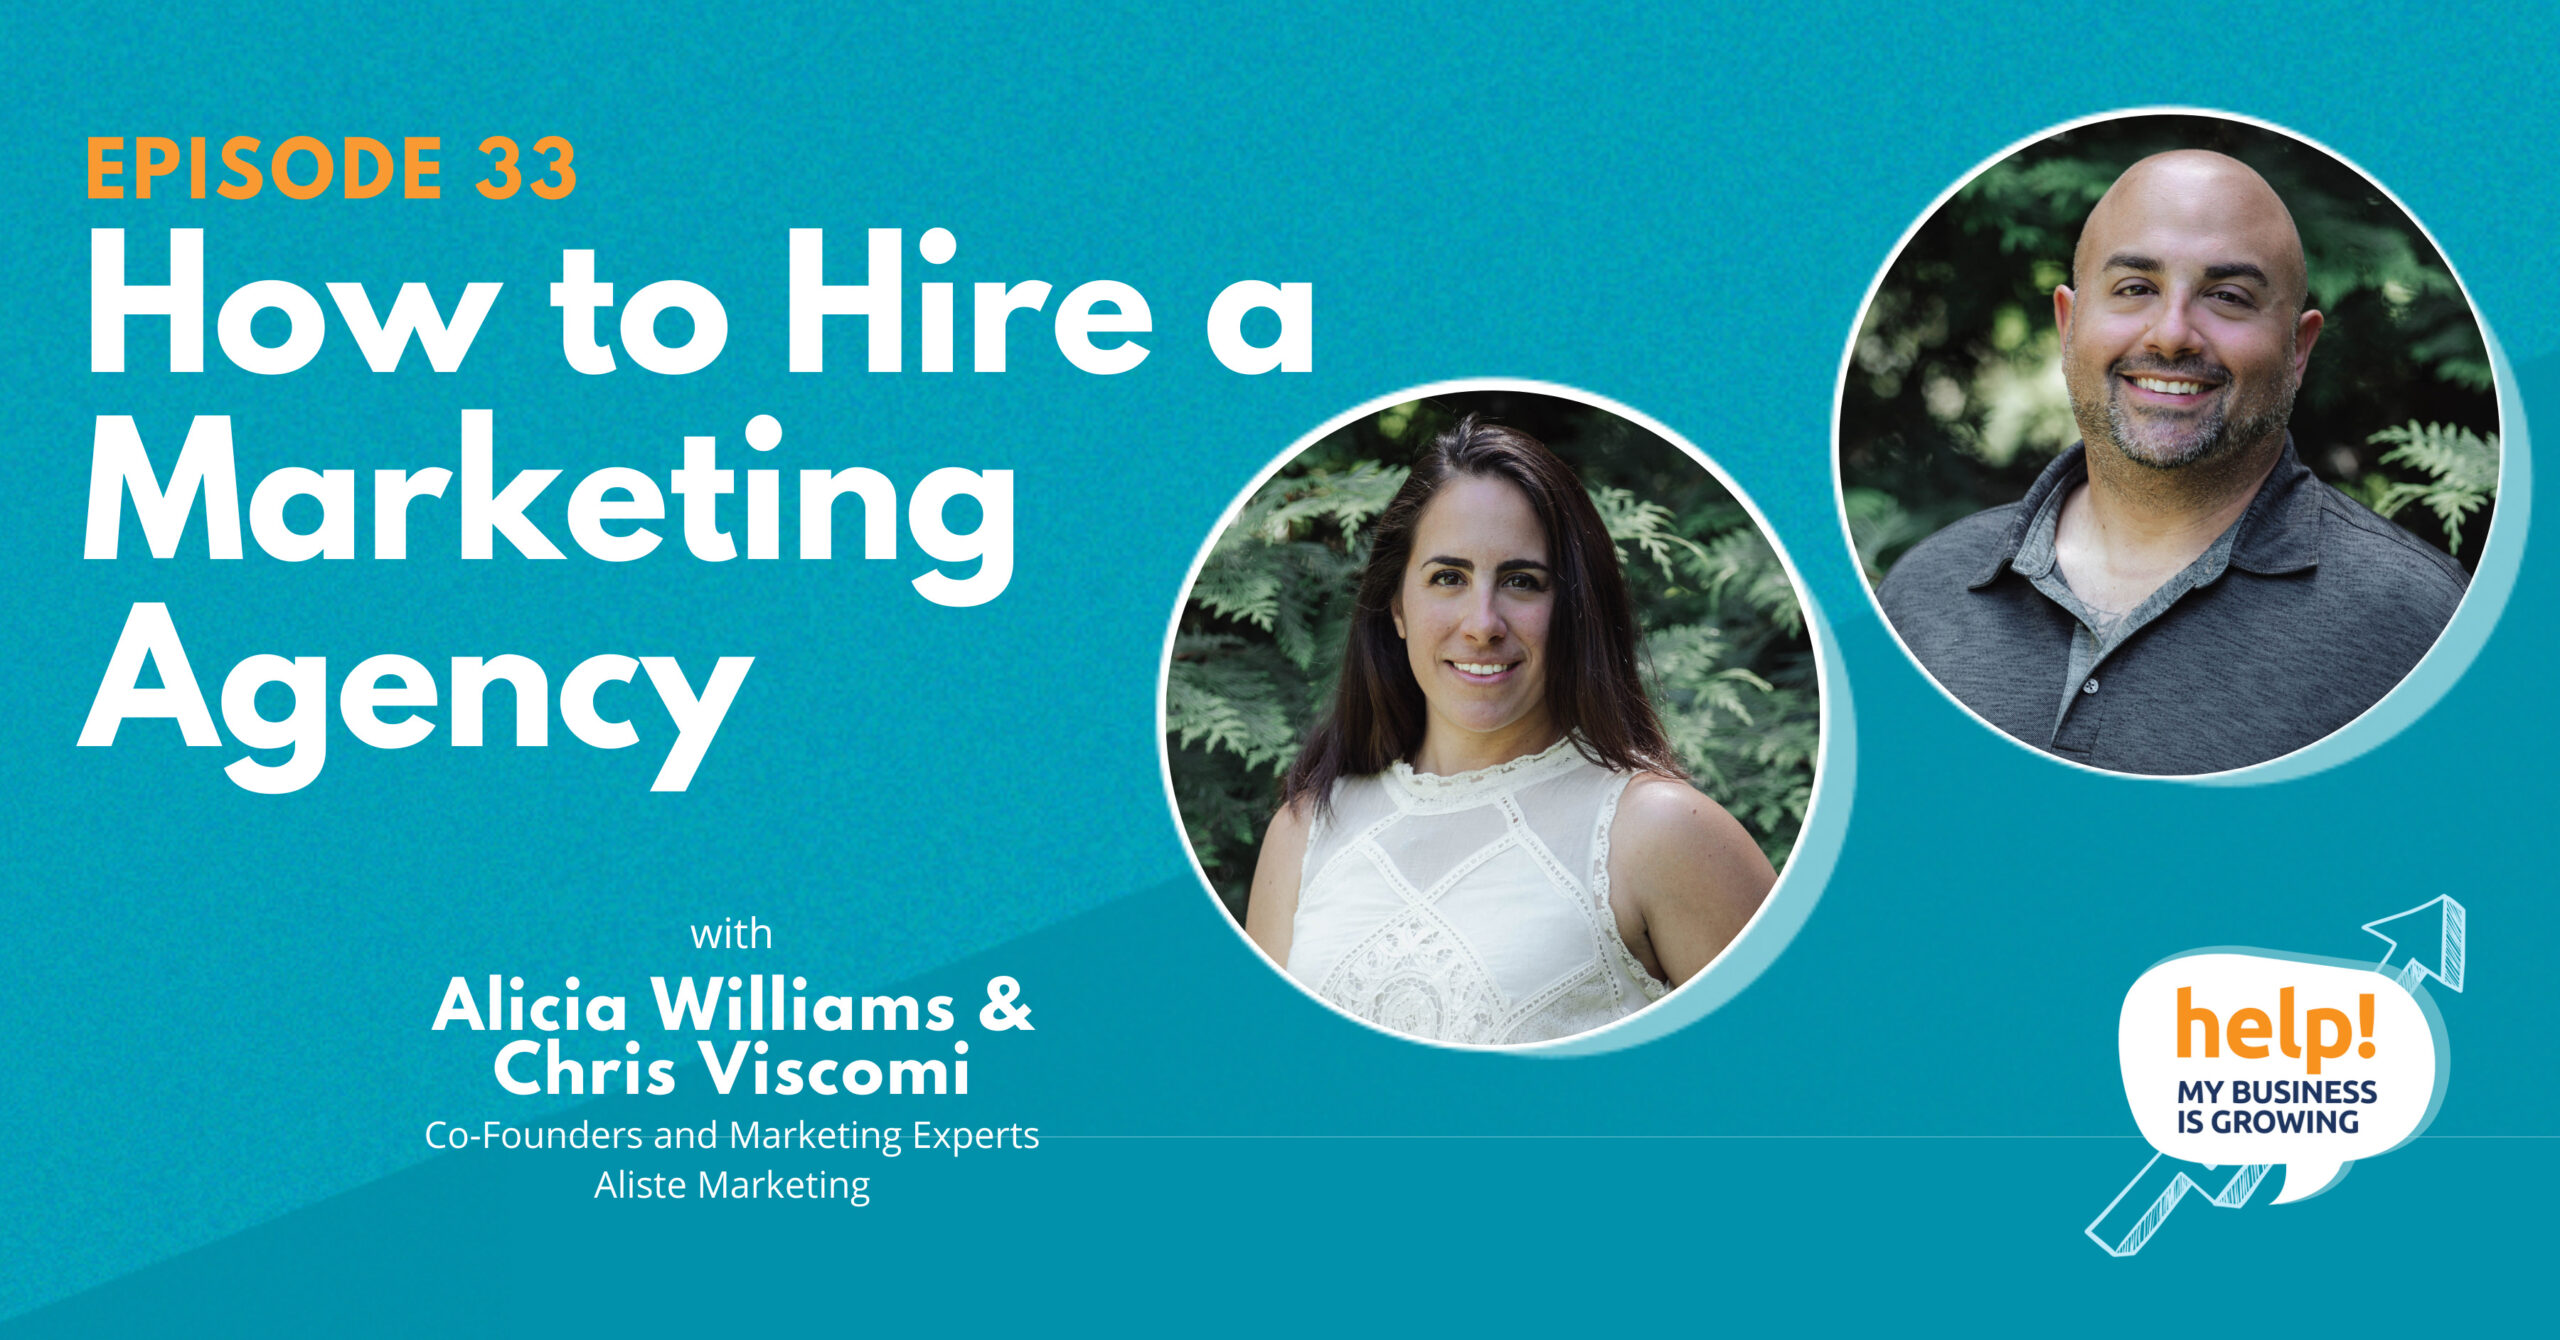 How to Hire a Marketing Agency